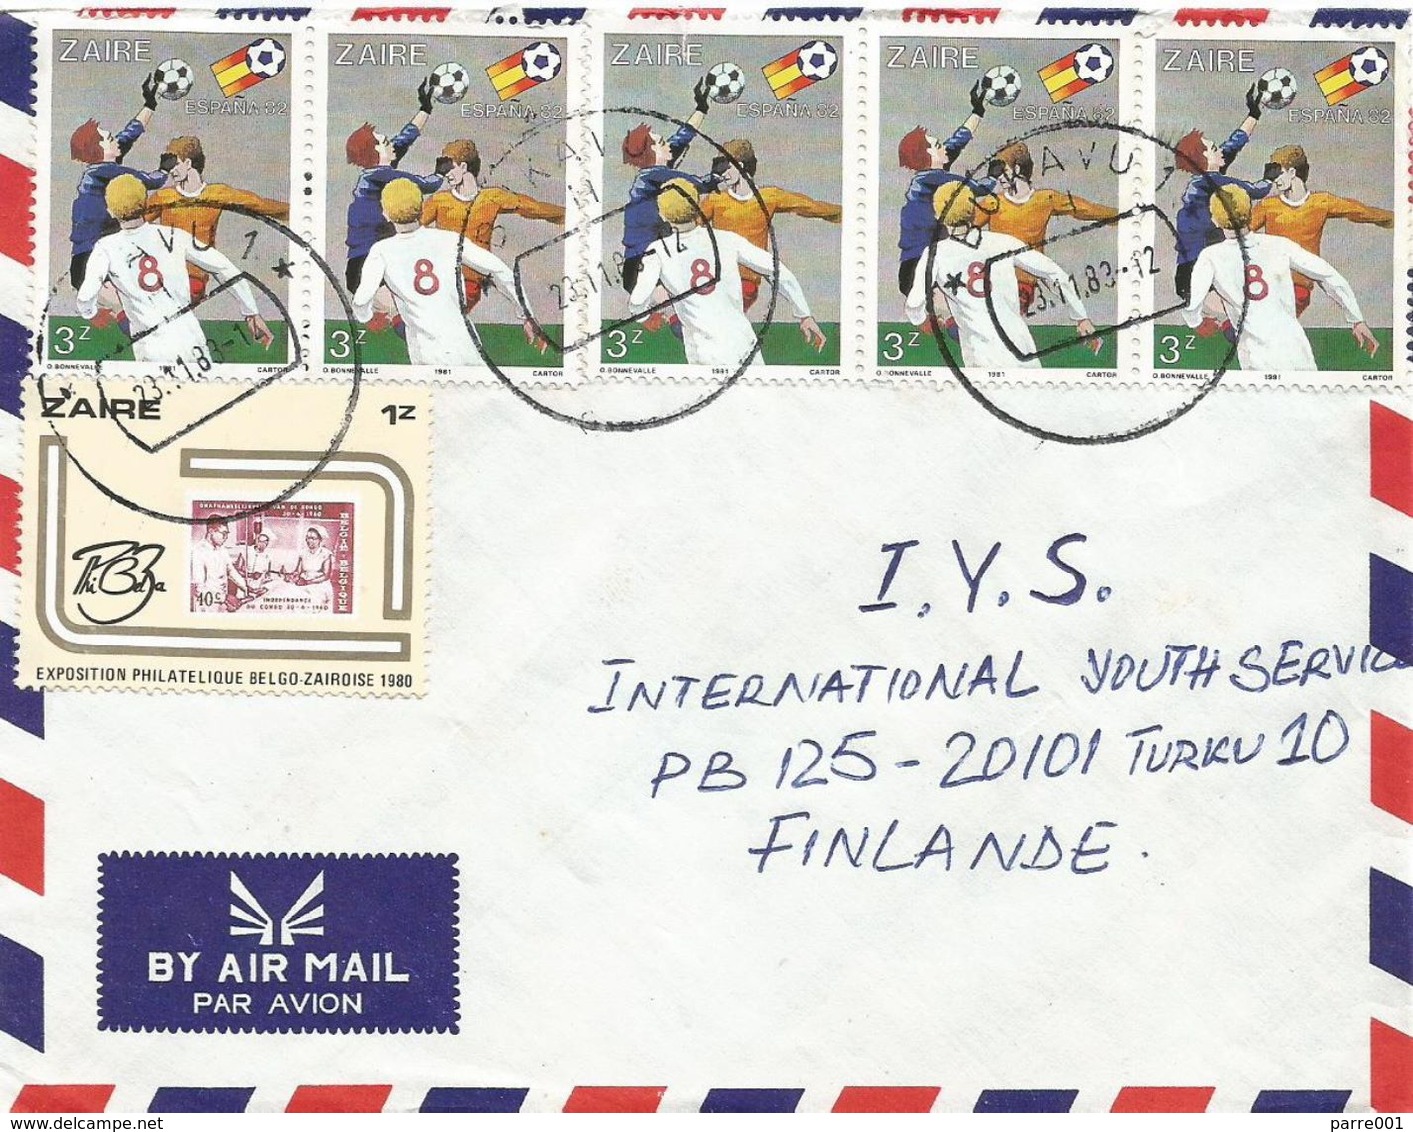 Zaire DRC Congo 1983 Bukavu World Cup Football Spain 3Z Stamp Exhibition Stamps On Stamps 1Z Cover - Gebraucht